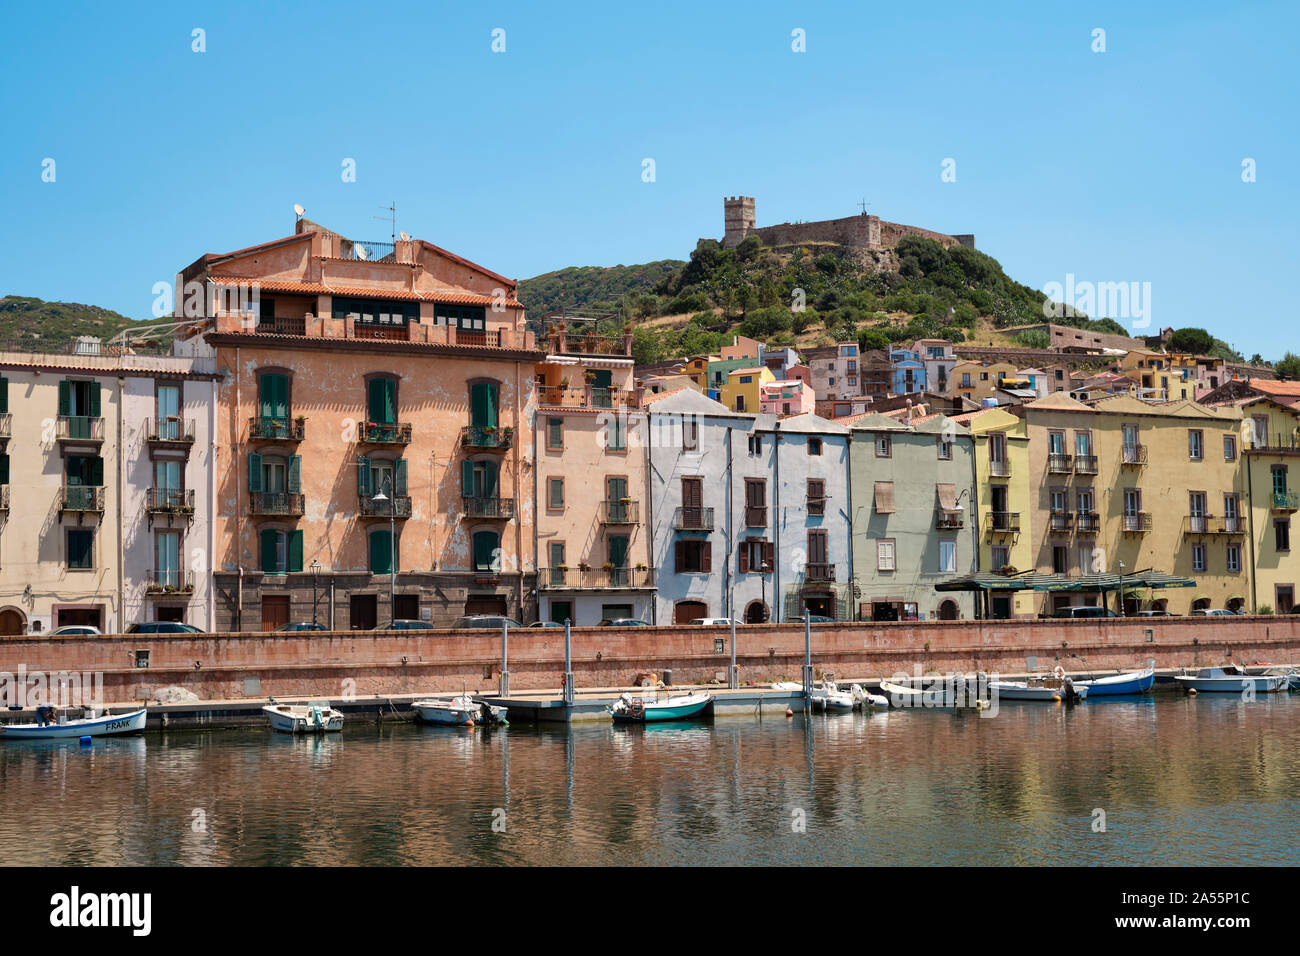 The colourful Bosa town and the Castle of Serravalle on the Temo river in the province of Oristano on the west coast of Sardinia Italy Europe Stock Photo